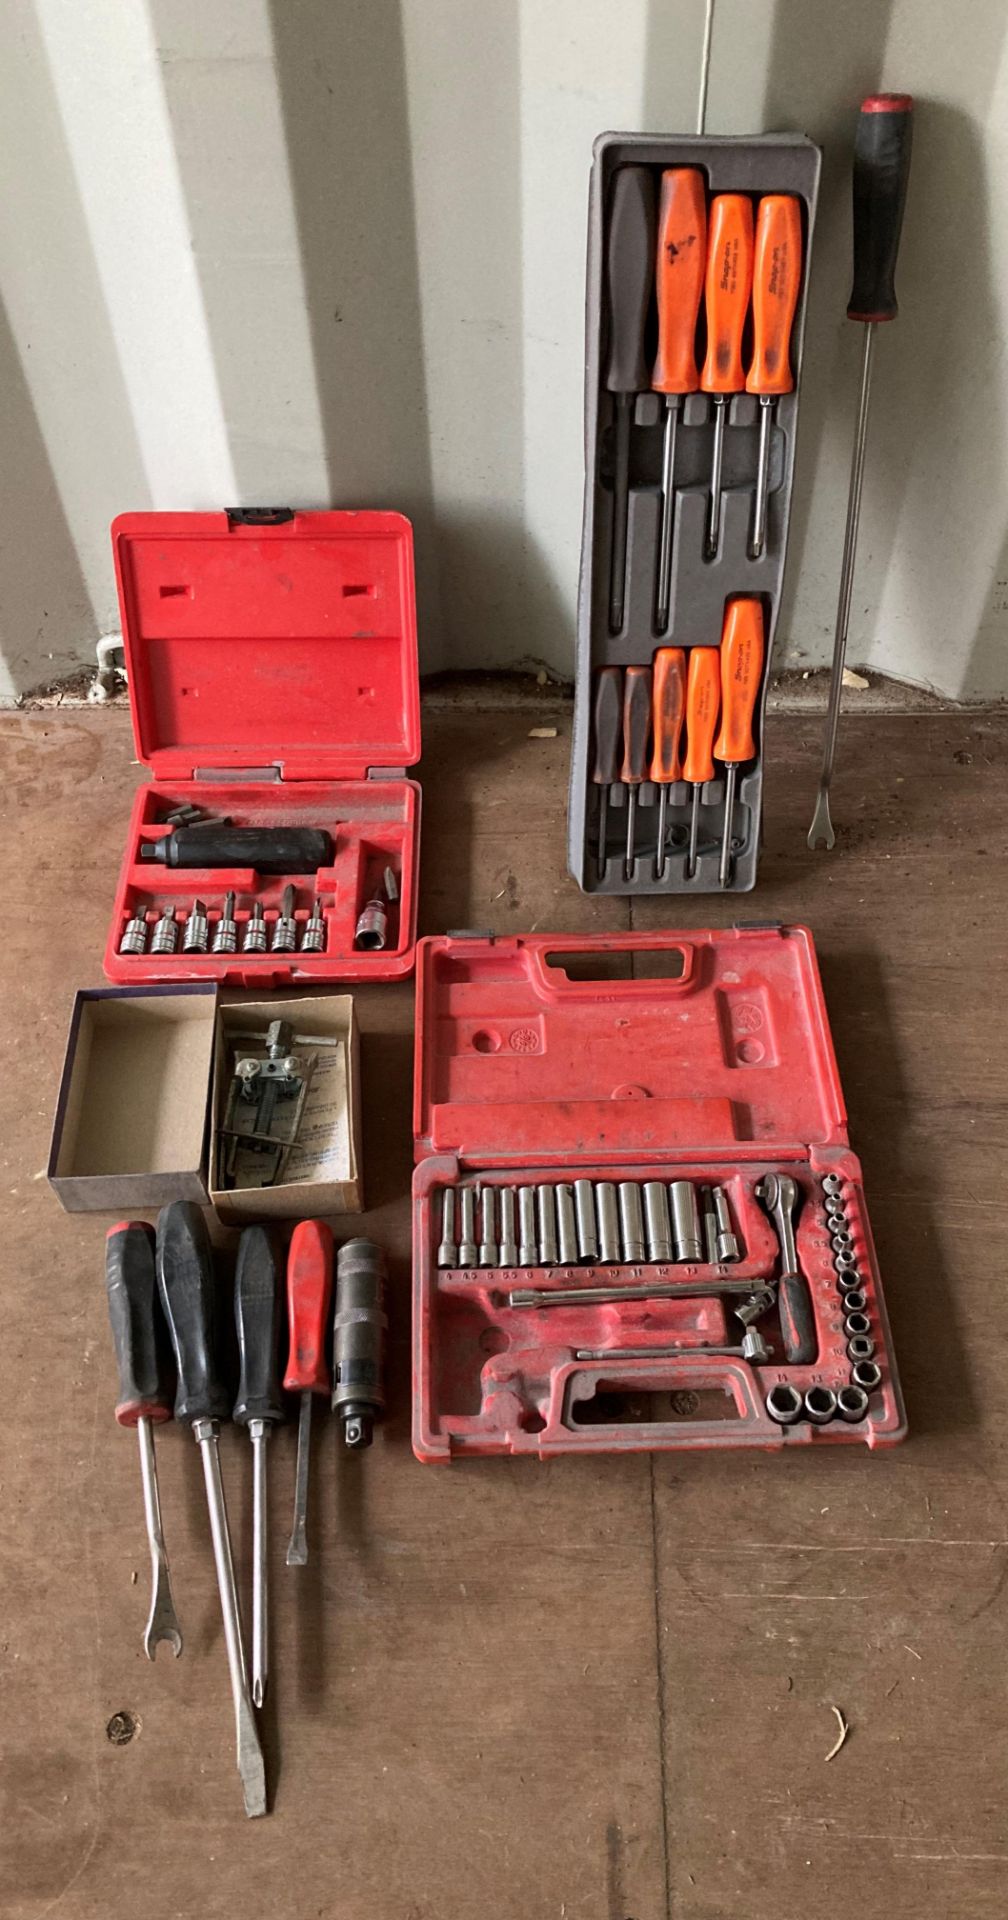 Contents to box - assorted snap-on hand tools including part impact driver set,